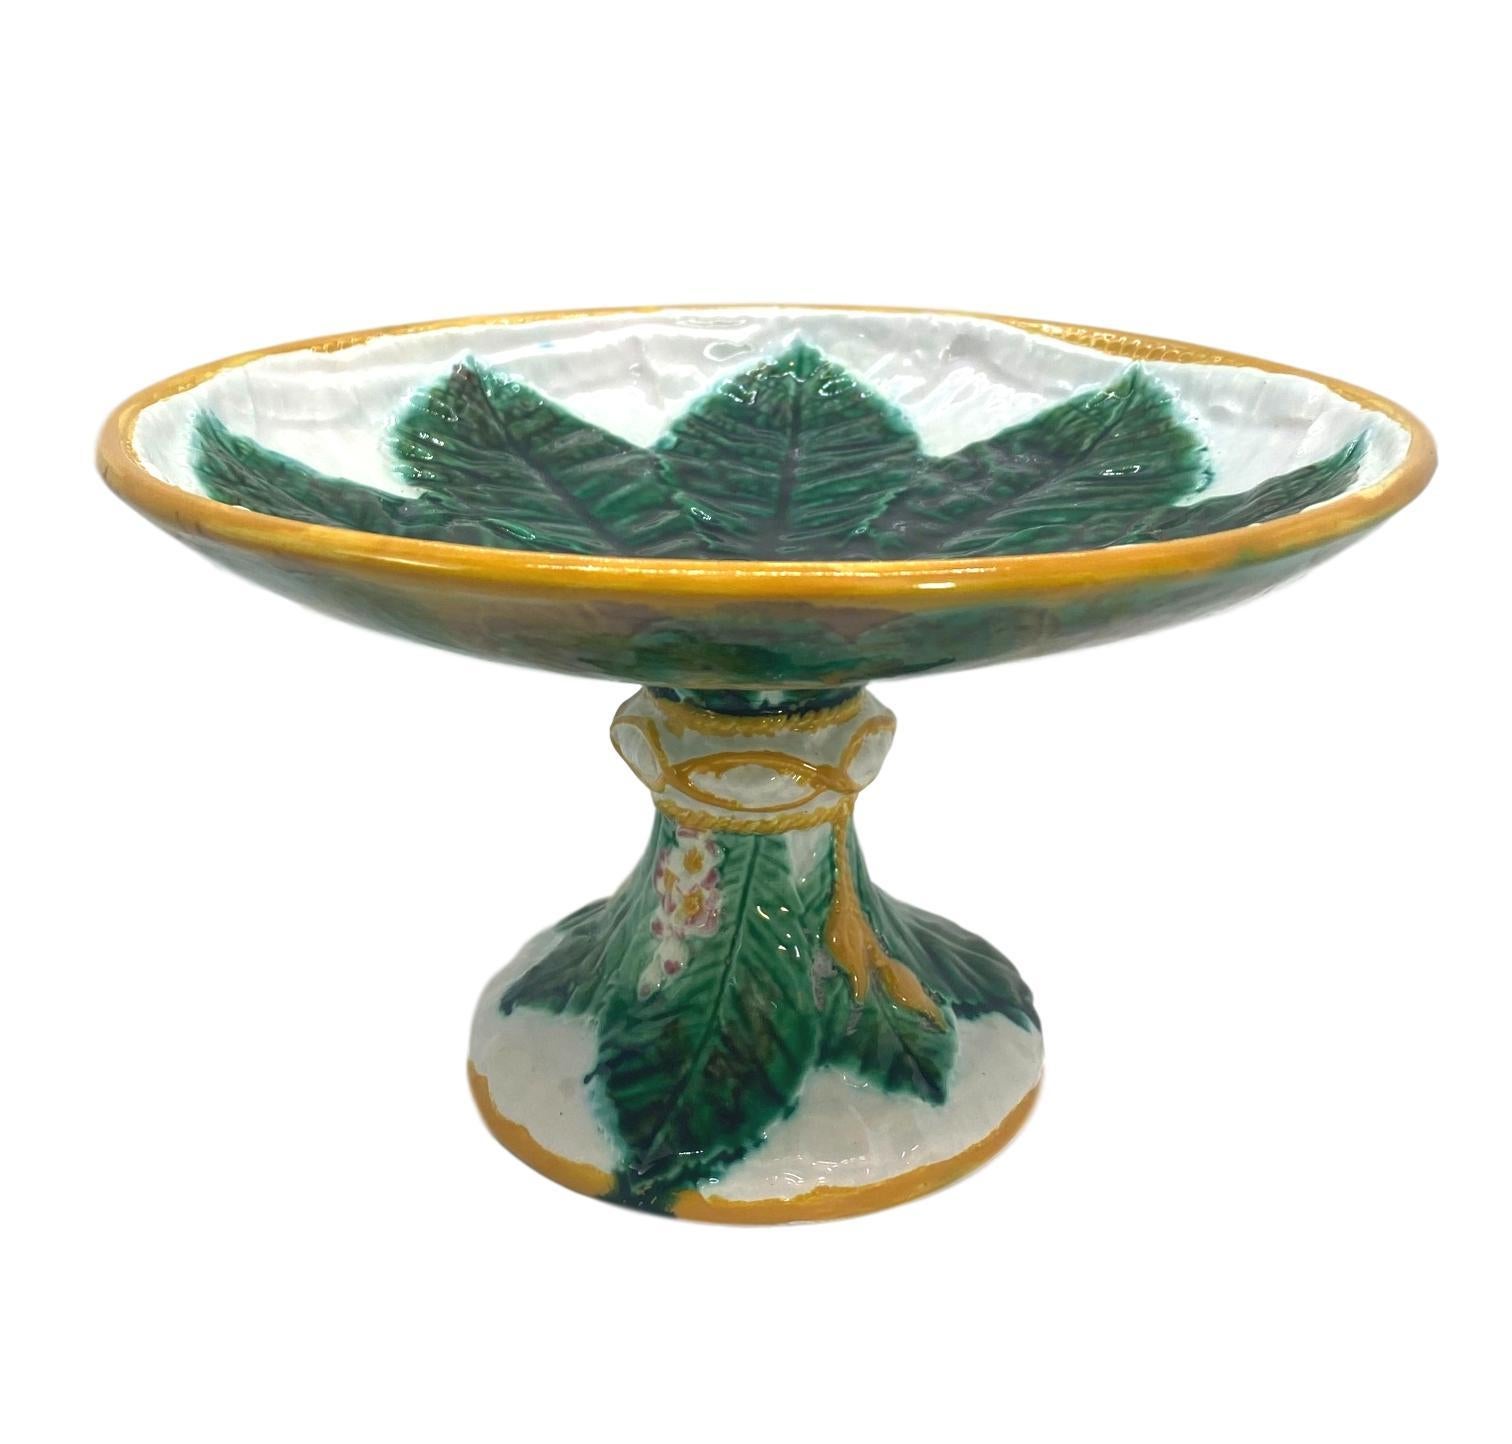 George Jones Majolica elevated comport, with a central green glazed horse chestnut leaf on a relief- molded white napkin, the border glazed in ochre, the pedestal wrapped with an ochre tassel, with horse chestnut leaves and blossoms, English, circa